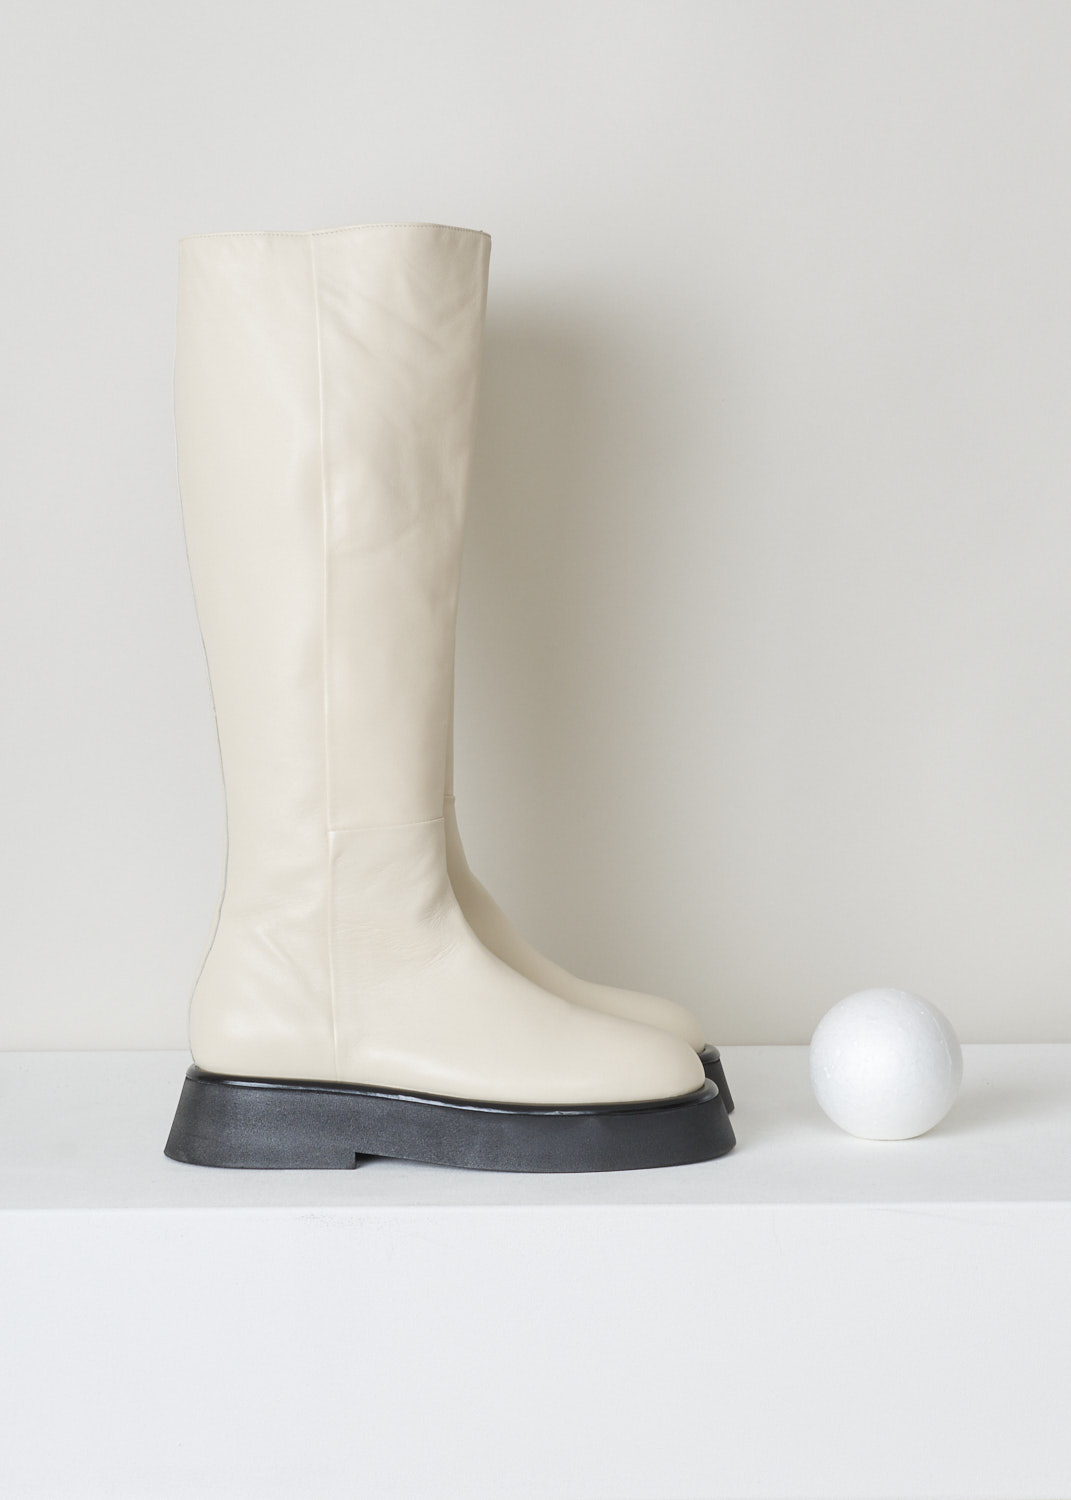 Wandler, Full-length white rosa boot, 21208_601204_1062_moon, white, side, Made out of the softest kind of leather being lambskin, featuring a full length concealed zipper. The thick flat sole flares out a bit, adding power to this minimalistic design. 